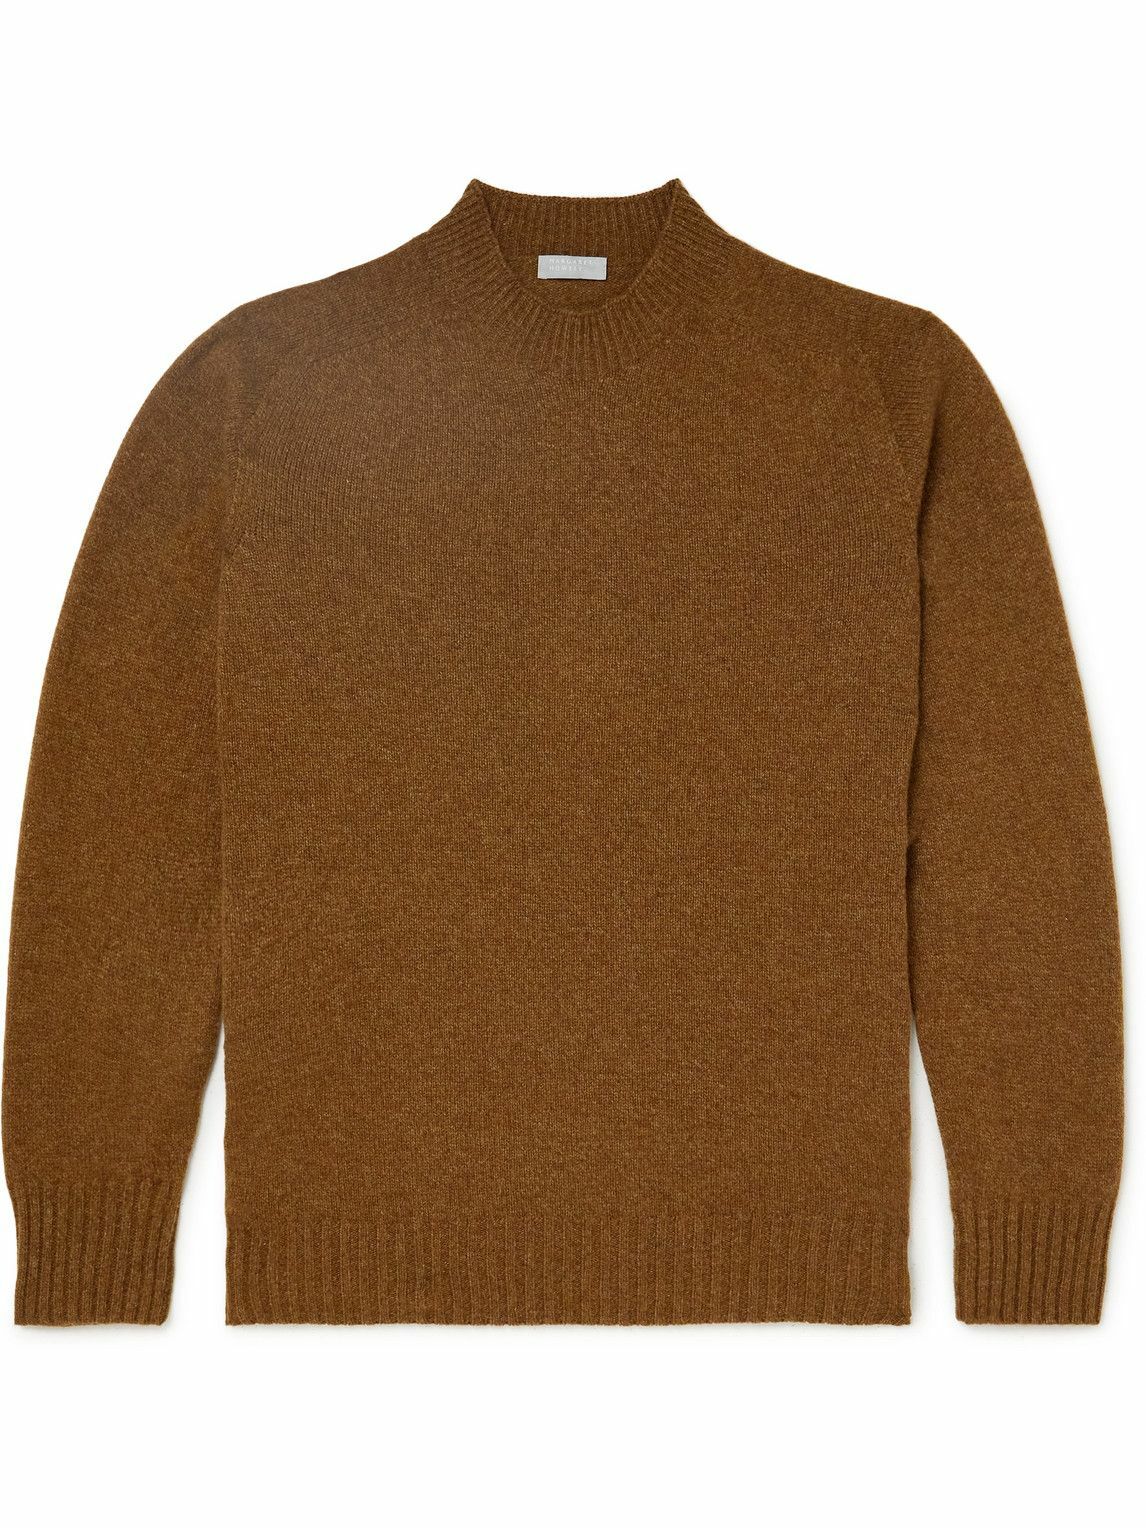 Margaret Howell - Saddle Merino Wool and Cashmere-Blend Sweater - Brown ...